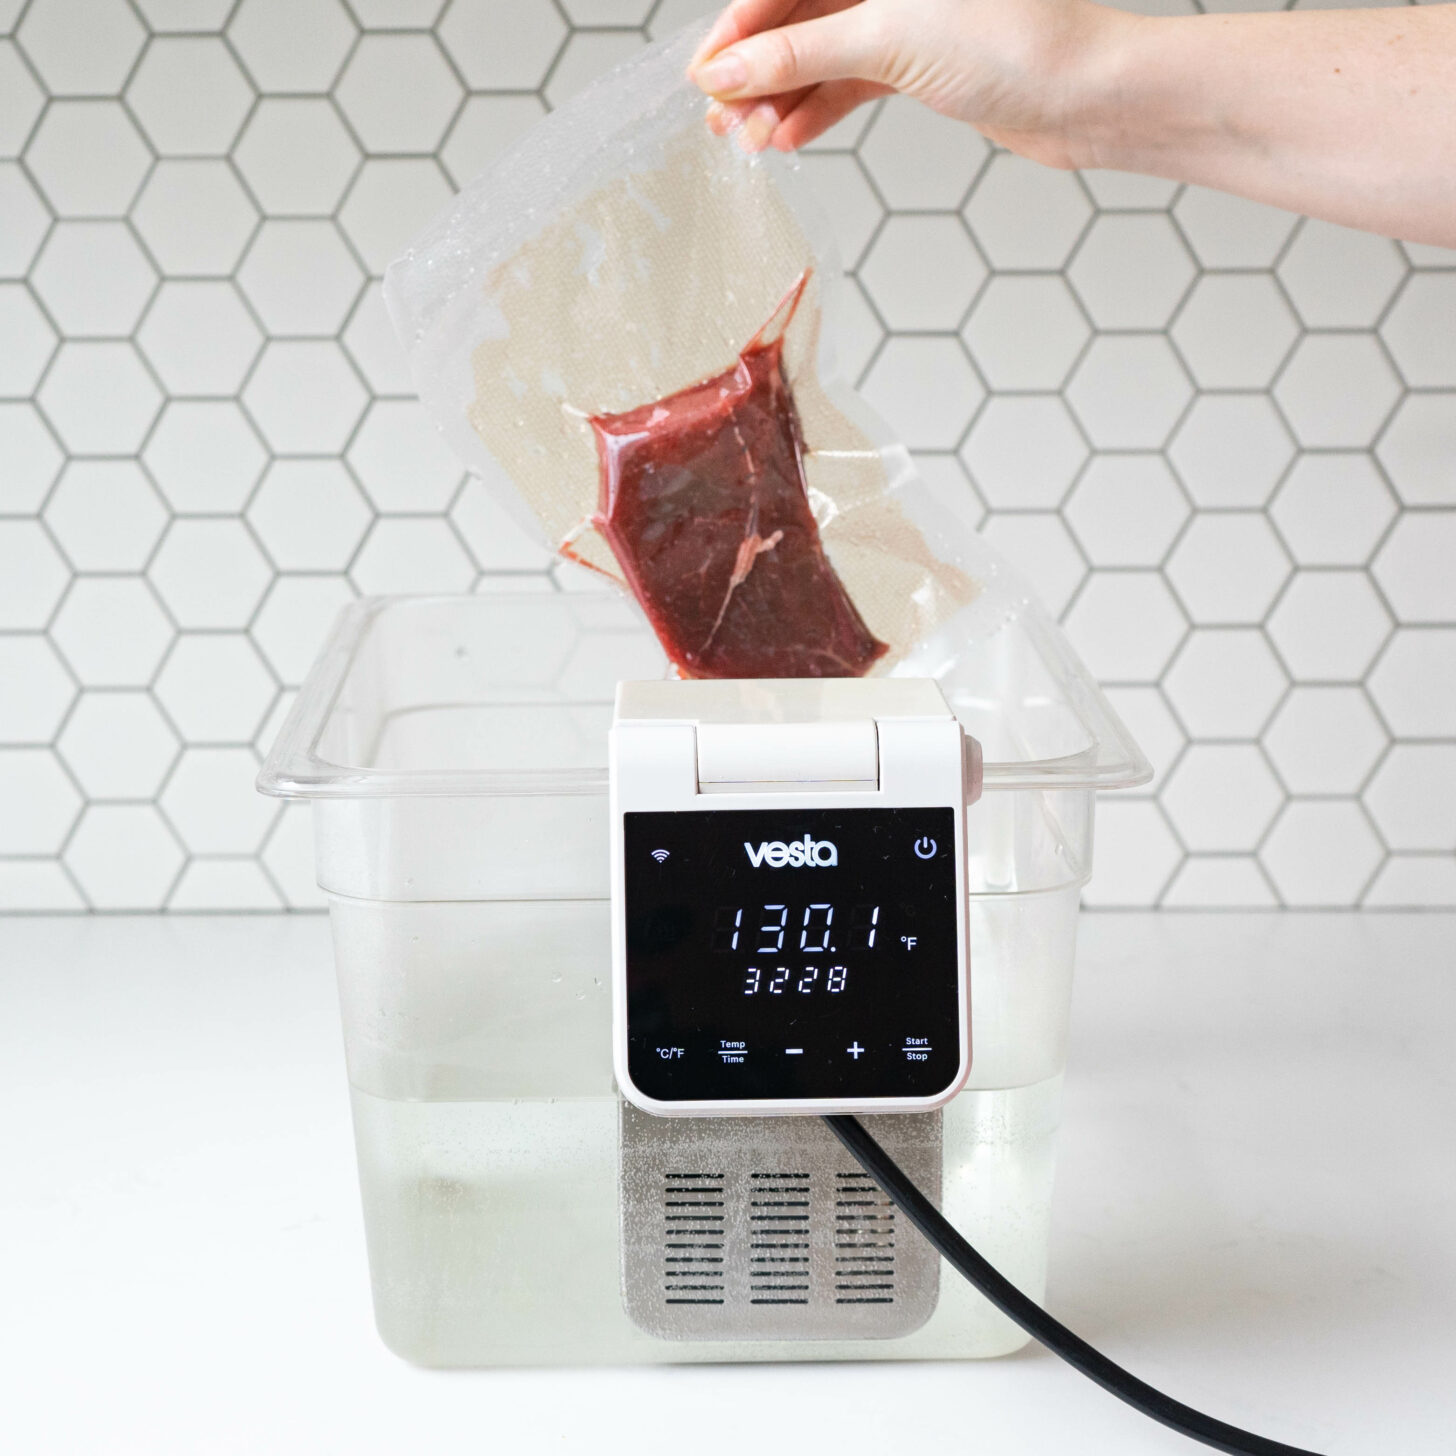 How to Sous Vide - A Beginner's Guide - Sous Vide Ways